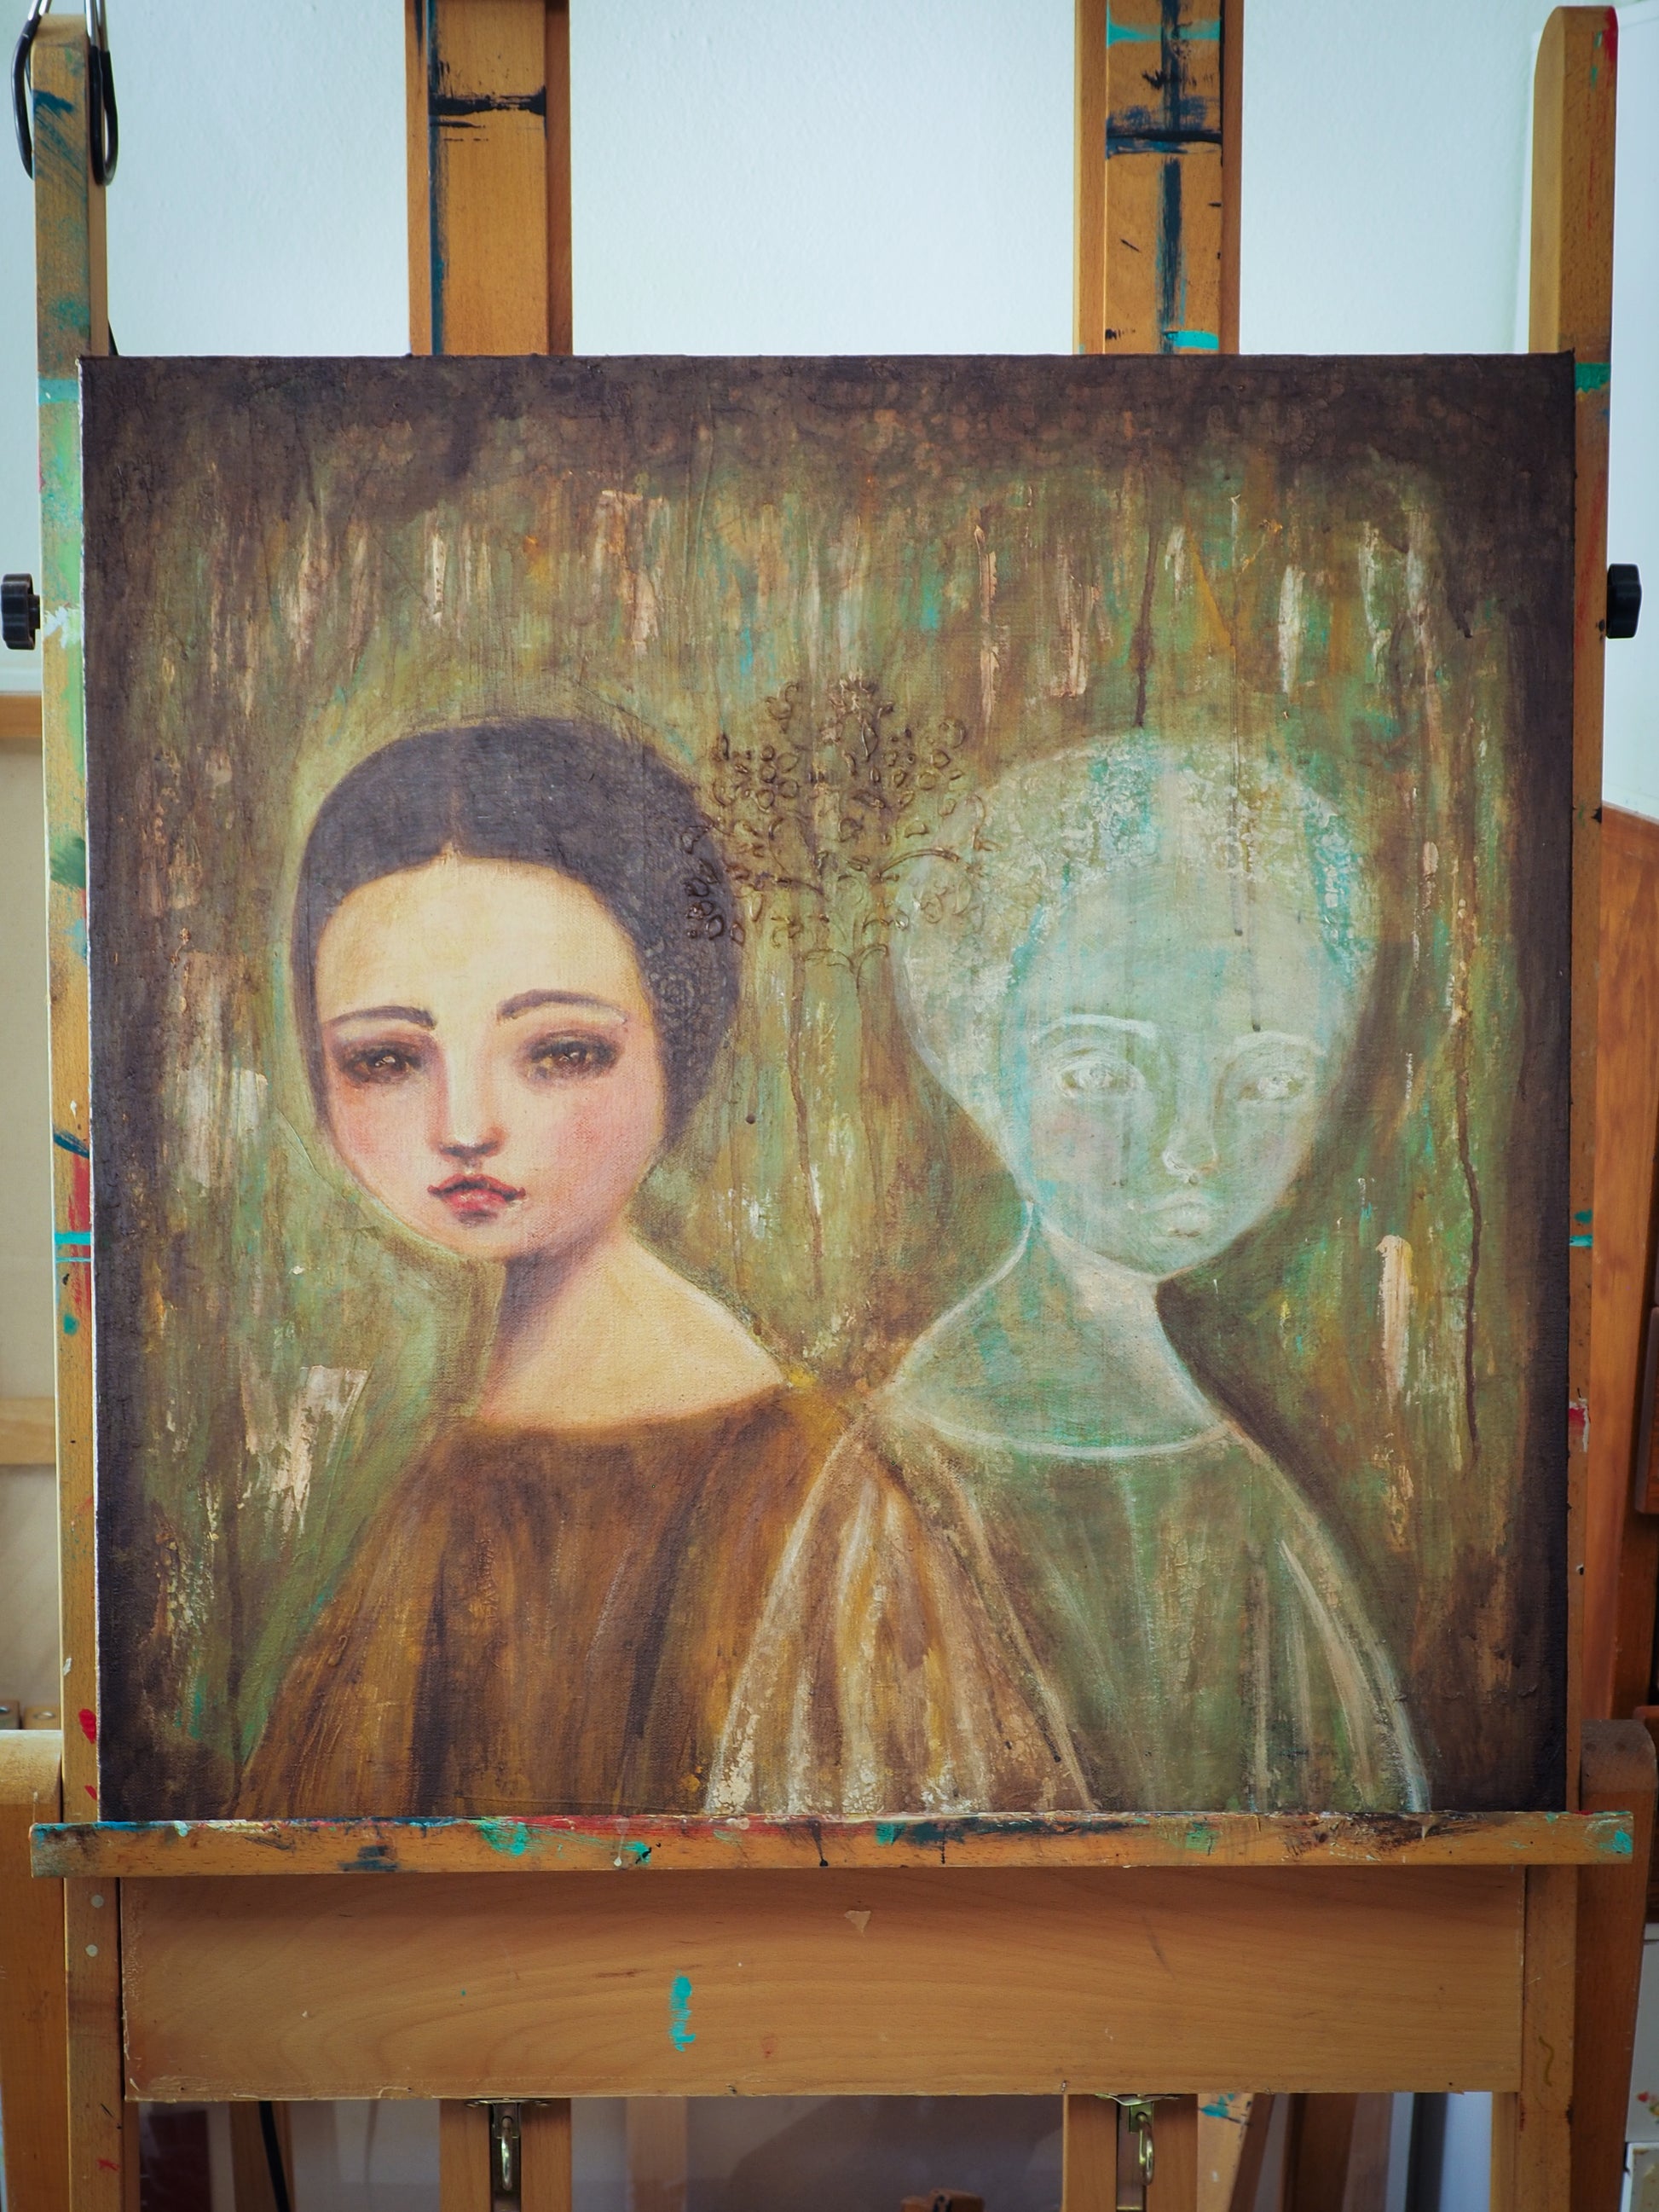 An original acrylic, oil, pastel and mixed media painting by Danita Art. Painted on a wood panel, two women pose on a portrait, one is living, the other is a ghost from a distant past but they share love, family bonds and experiences. They are soul sisters.